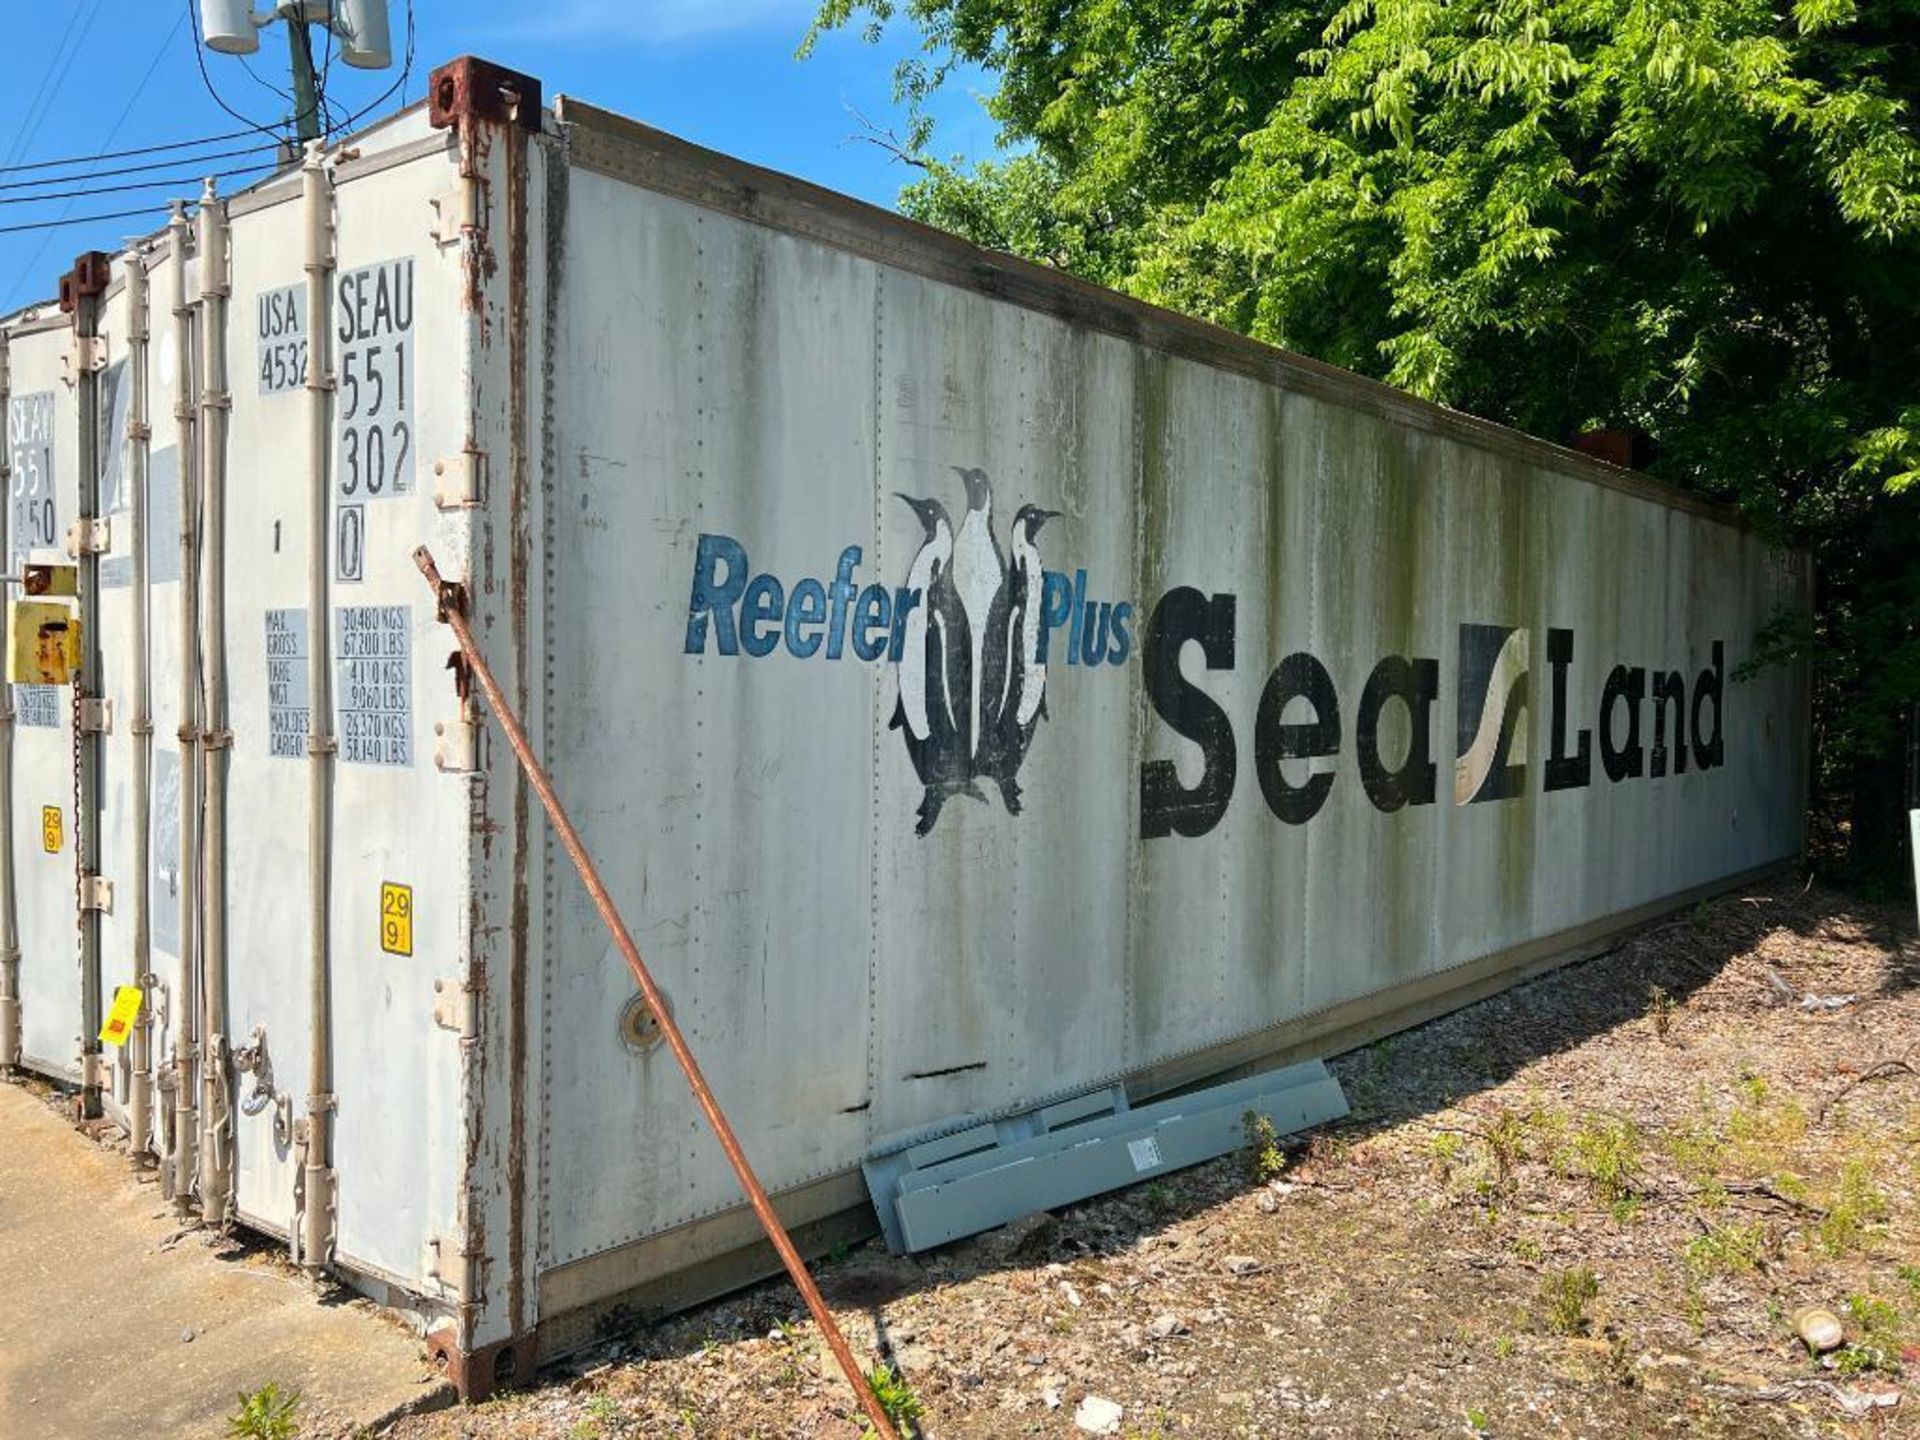 Reefer Plus Sea Land 67,200 LB Capacity Shipping Container, Dimensions = 40' x 10' - Image 2 of 2